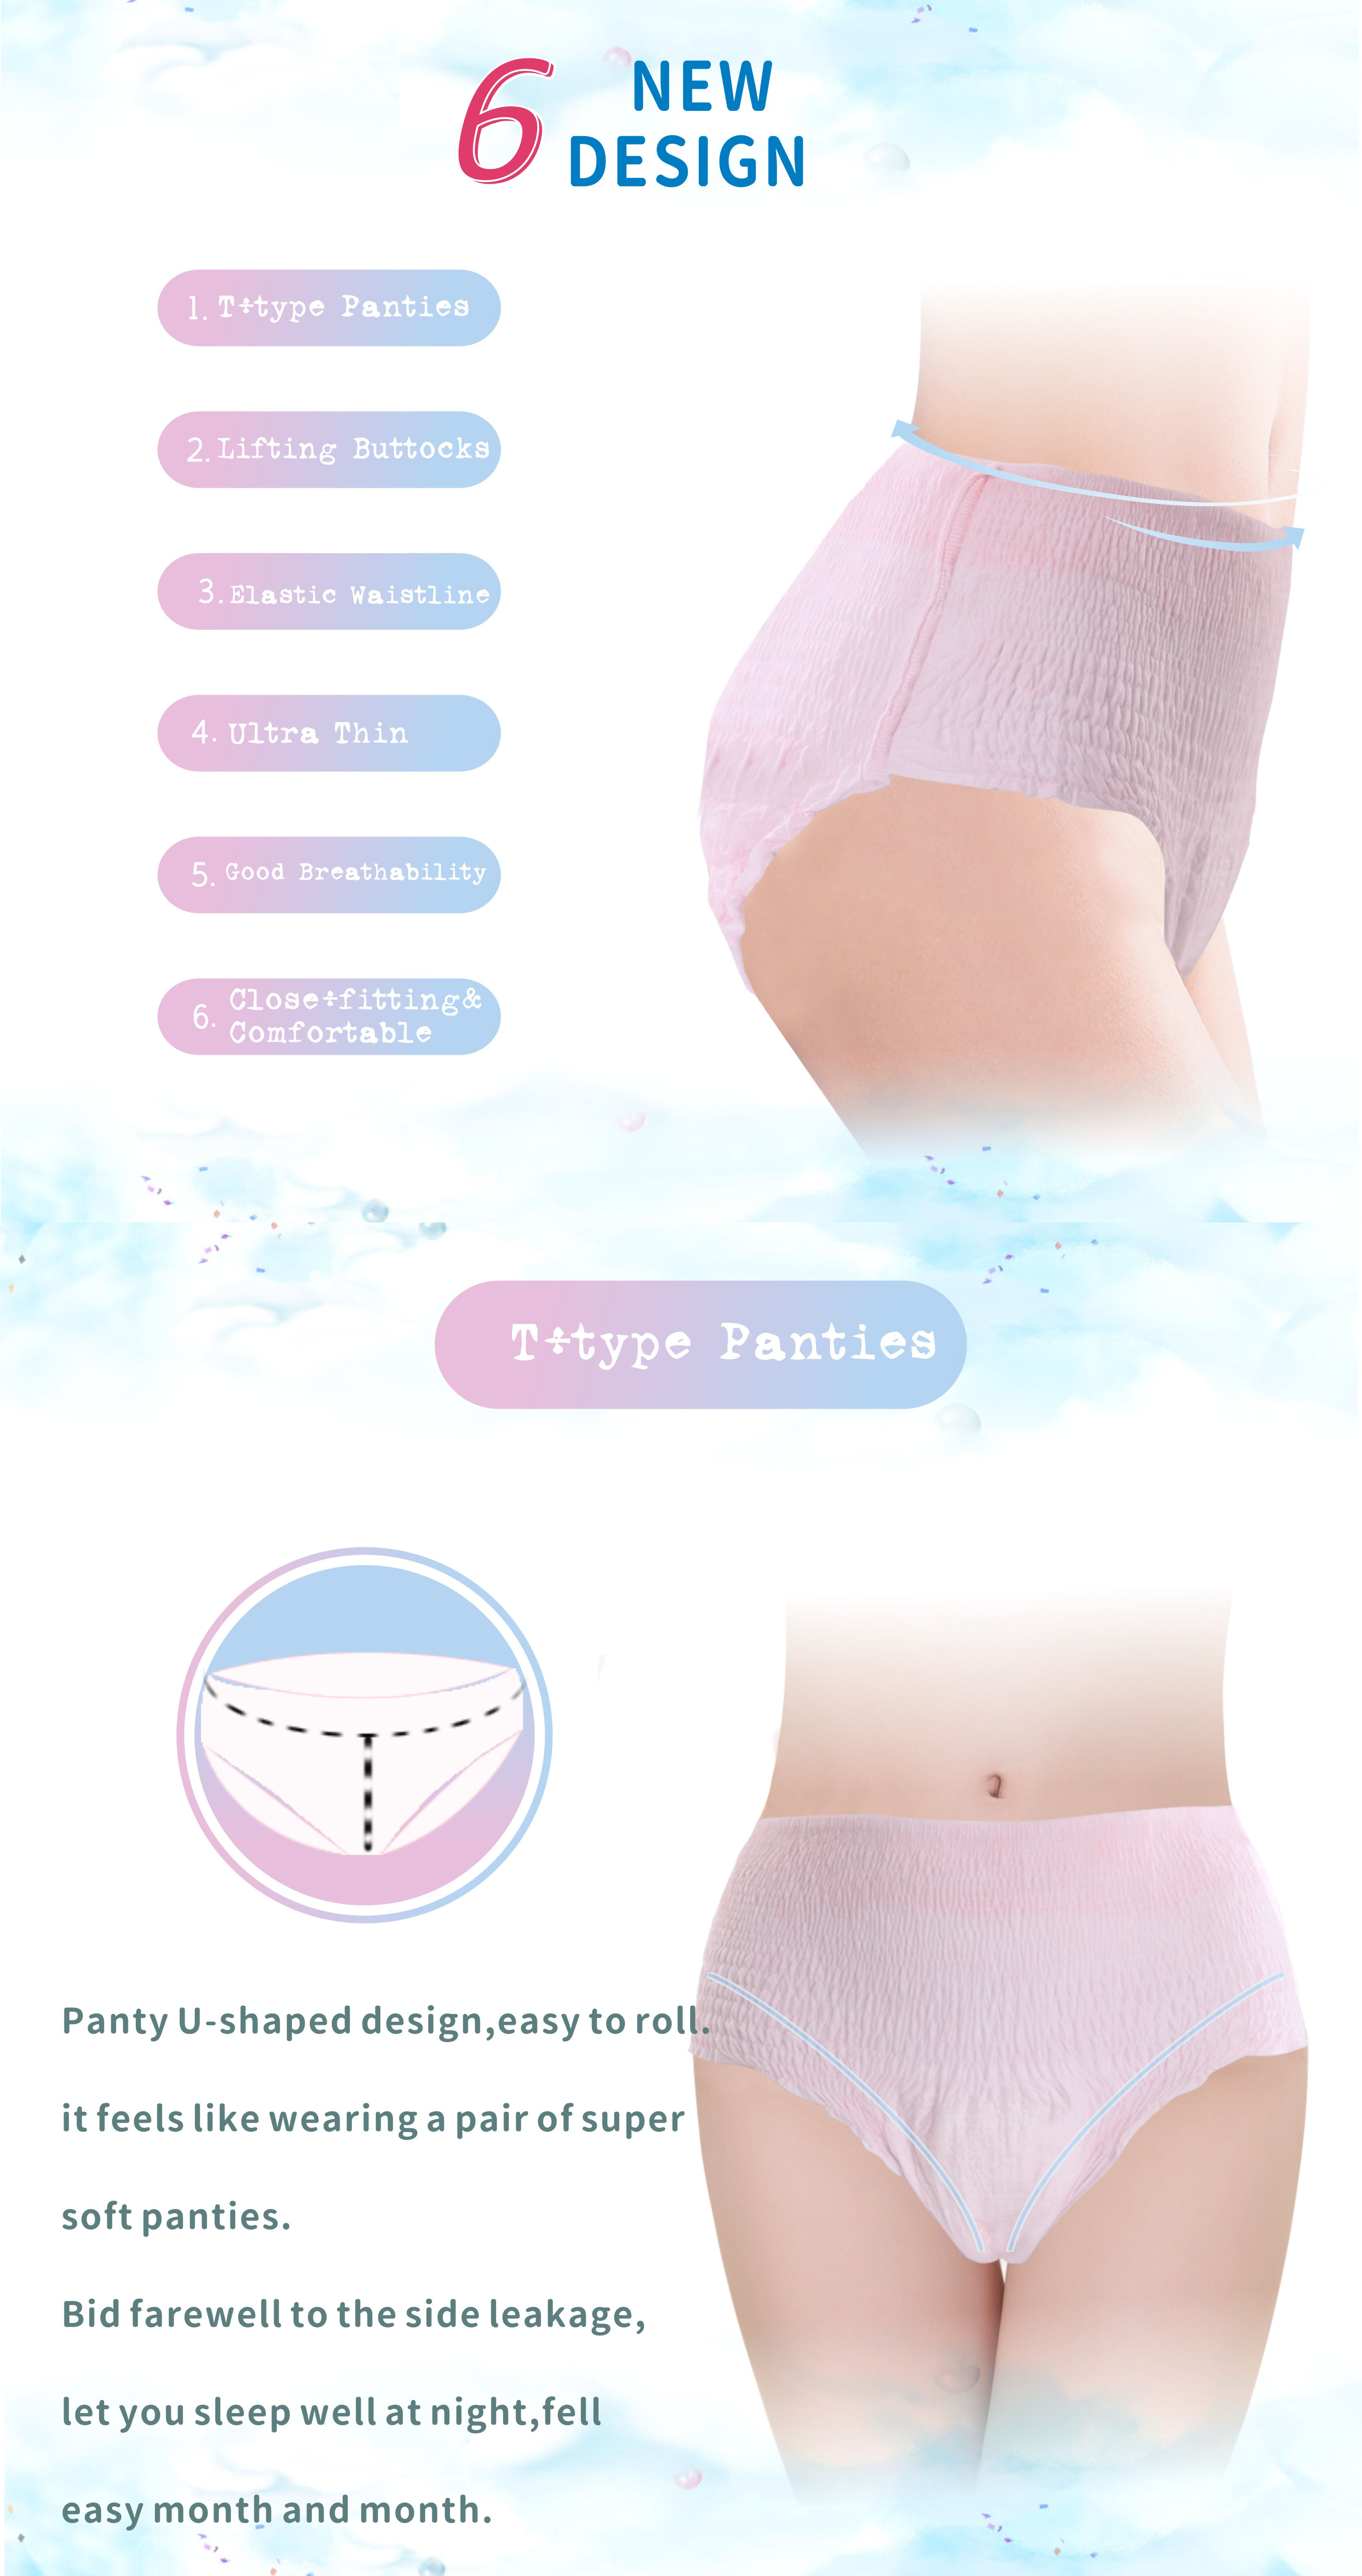 Disposable Soft Cotton Ultra-thin Soft Lady Menstrual Period Pants